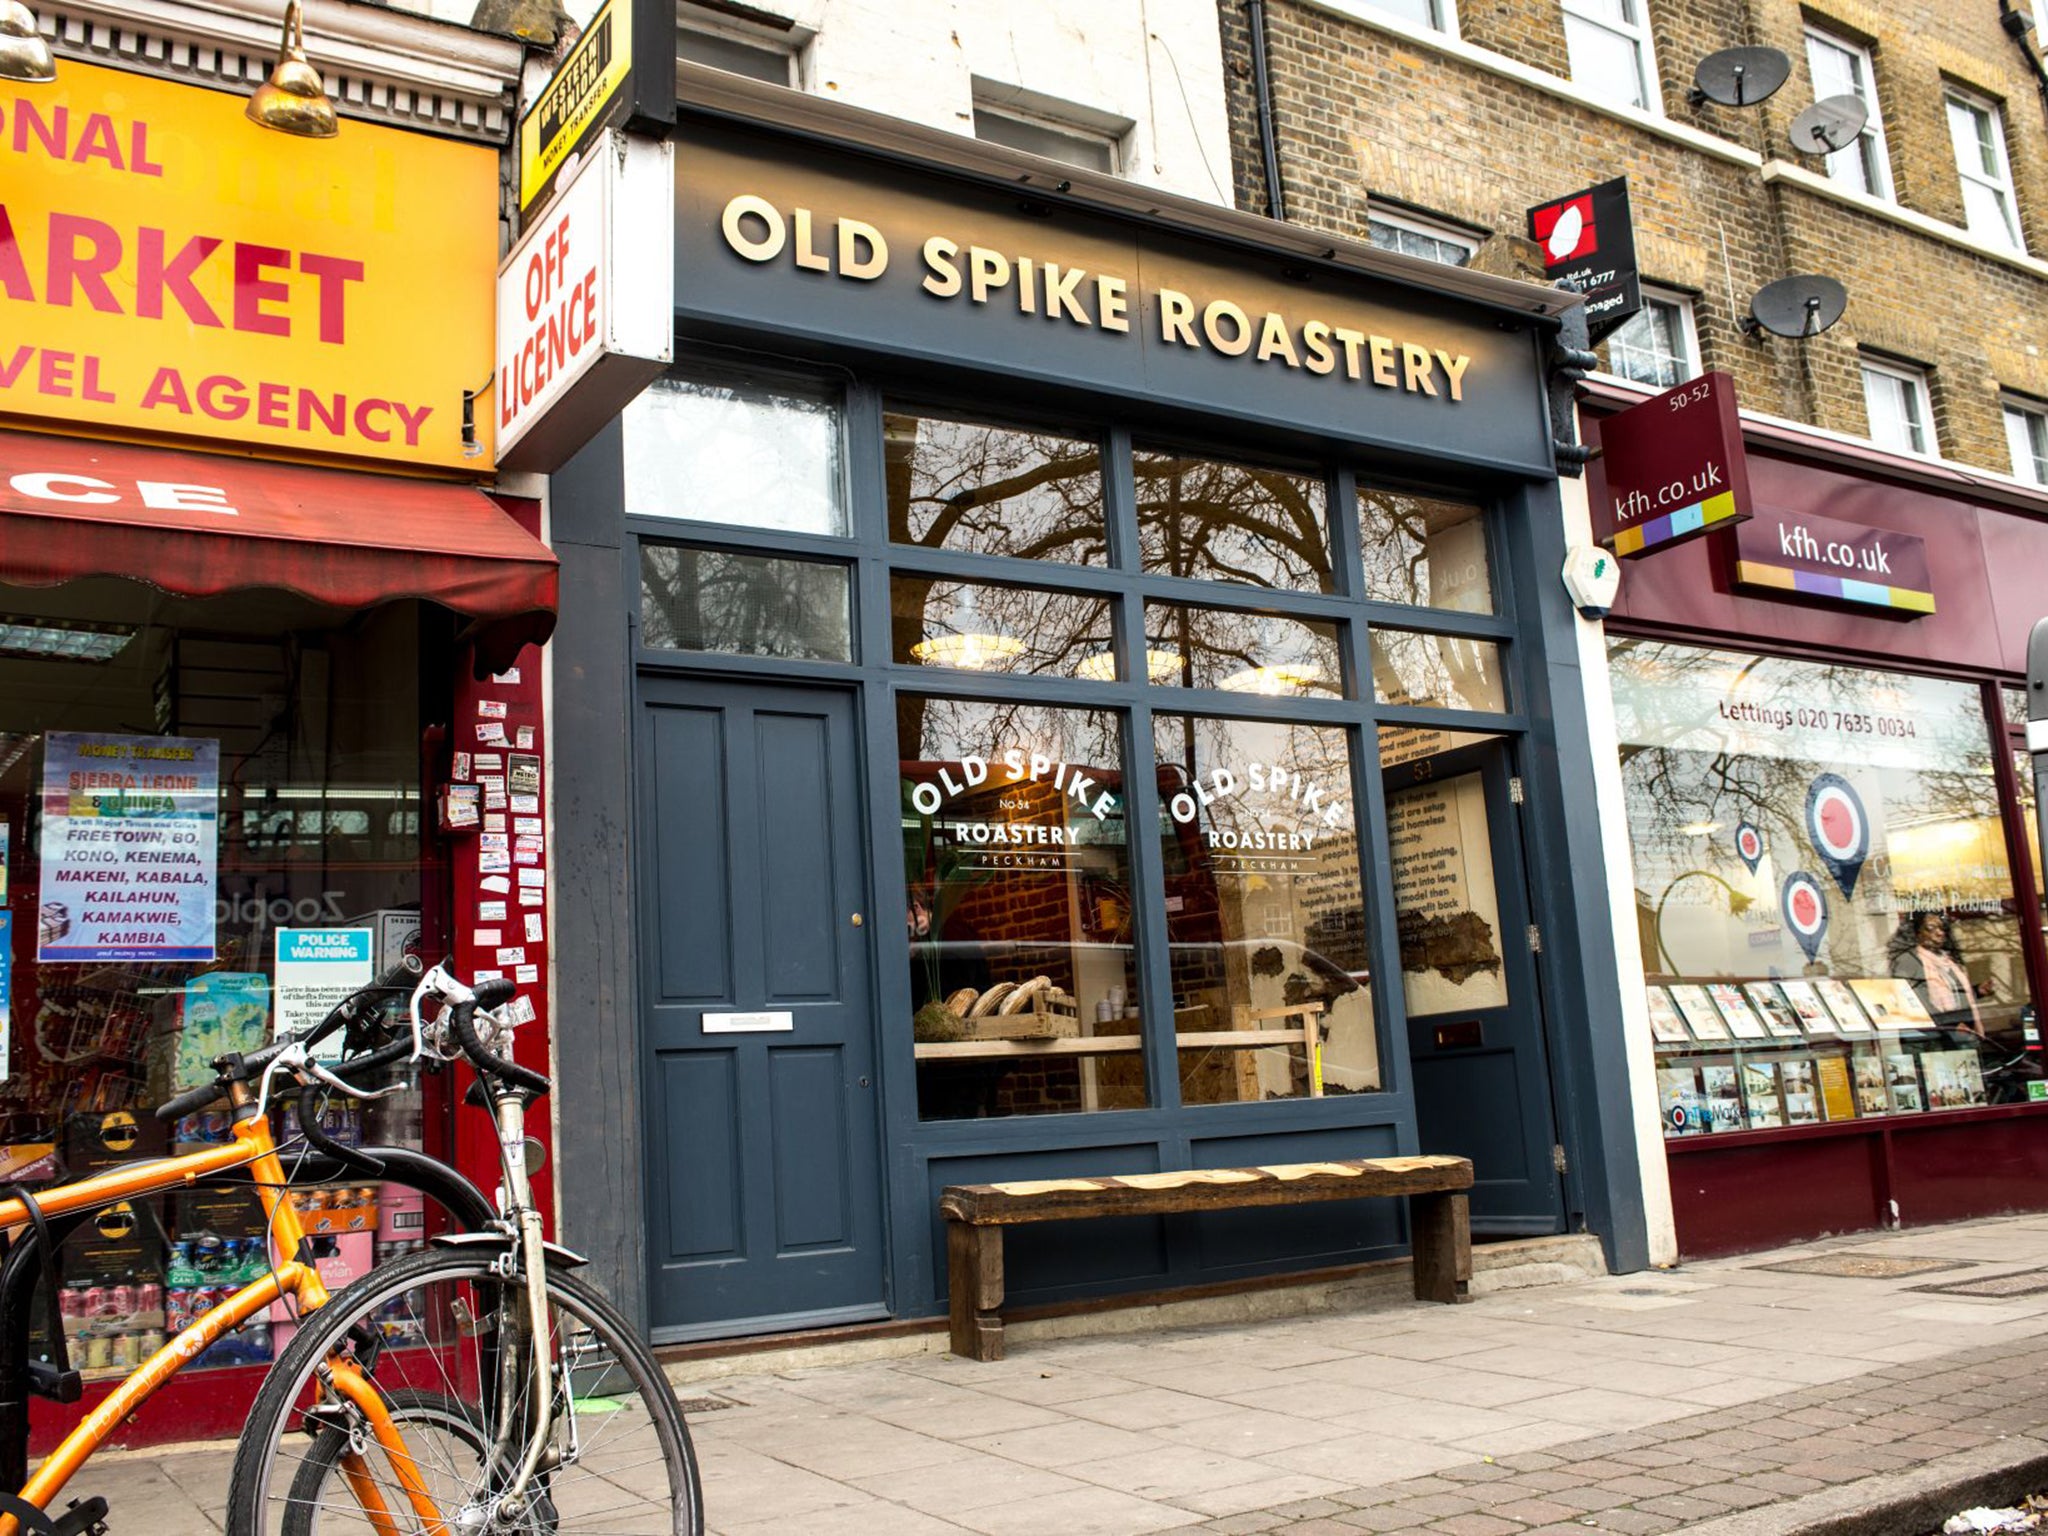 The ethos of the Old Spike Roastery is “good coffee, making a difference”, and they sell high-quality coffee at their shop in Peckham as well as online